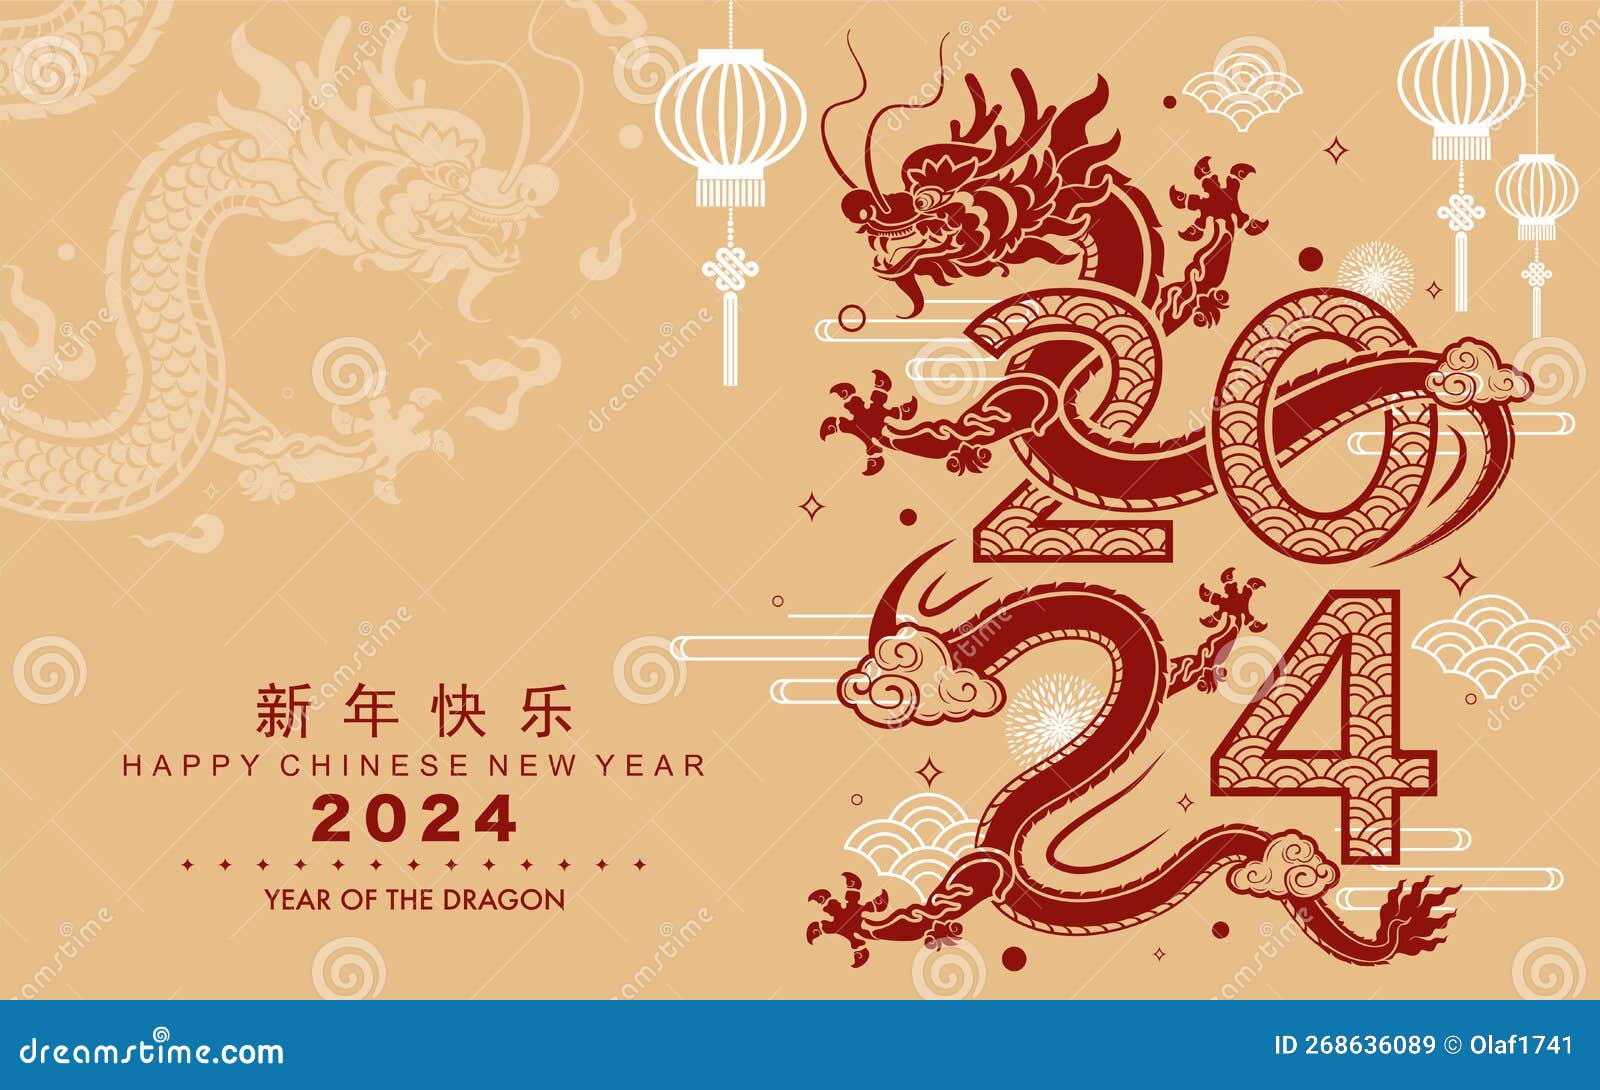 happy chinese new year 2024 the dragon zodiac sign with flower,lantern,asian s gold paper cut style on color background.